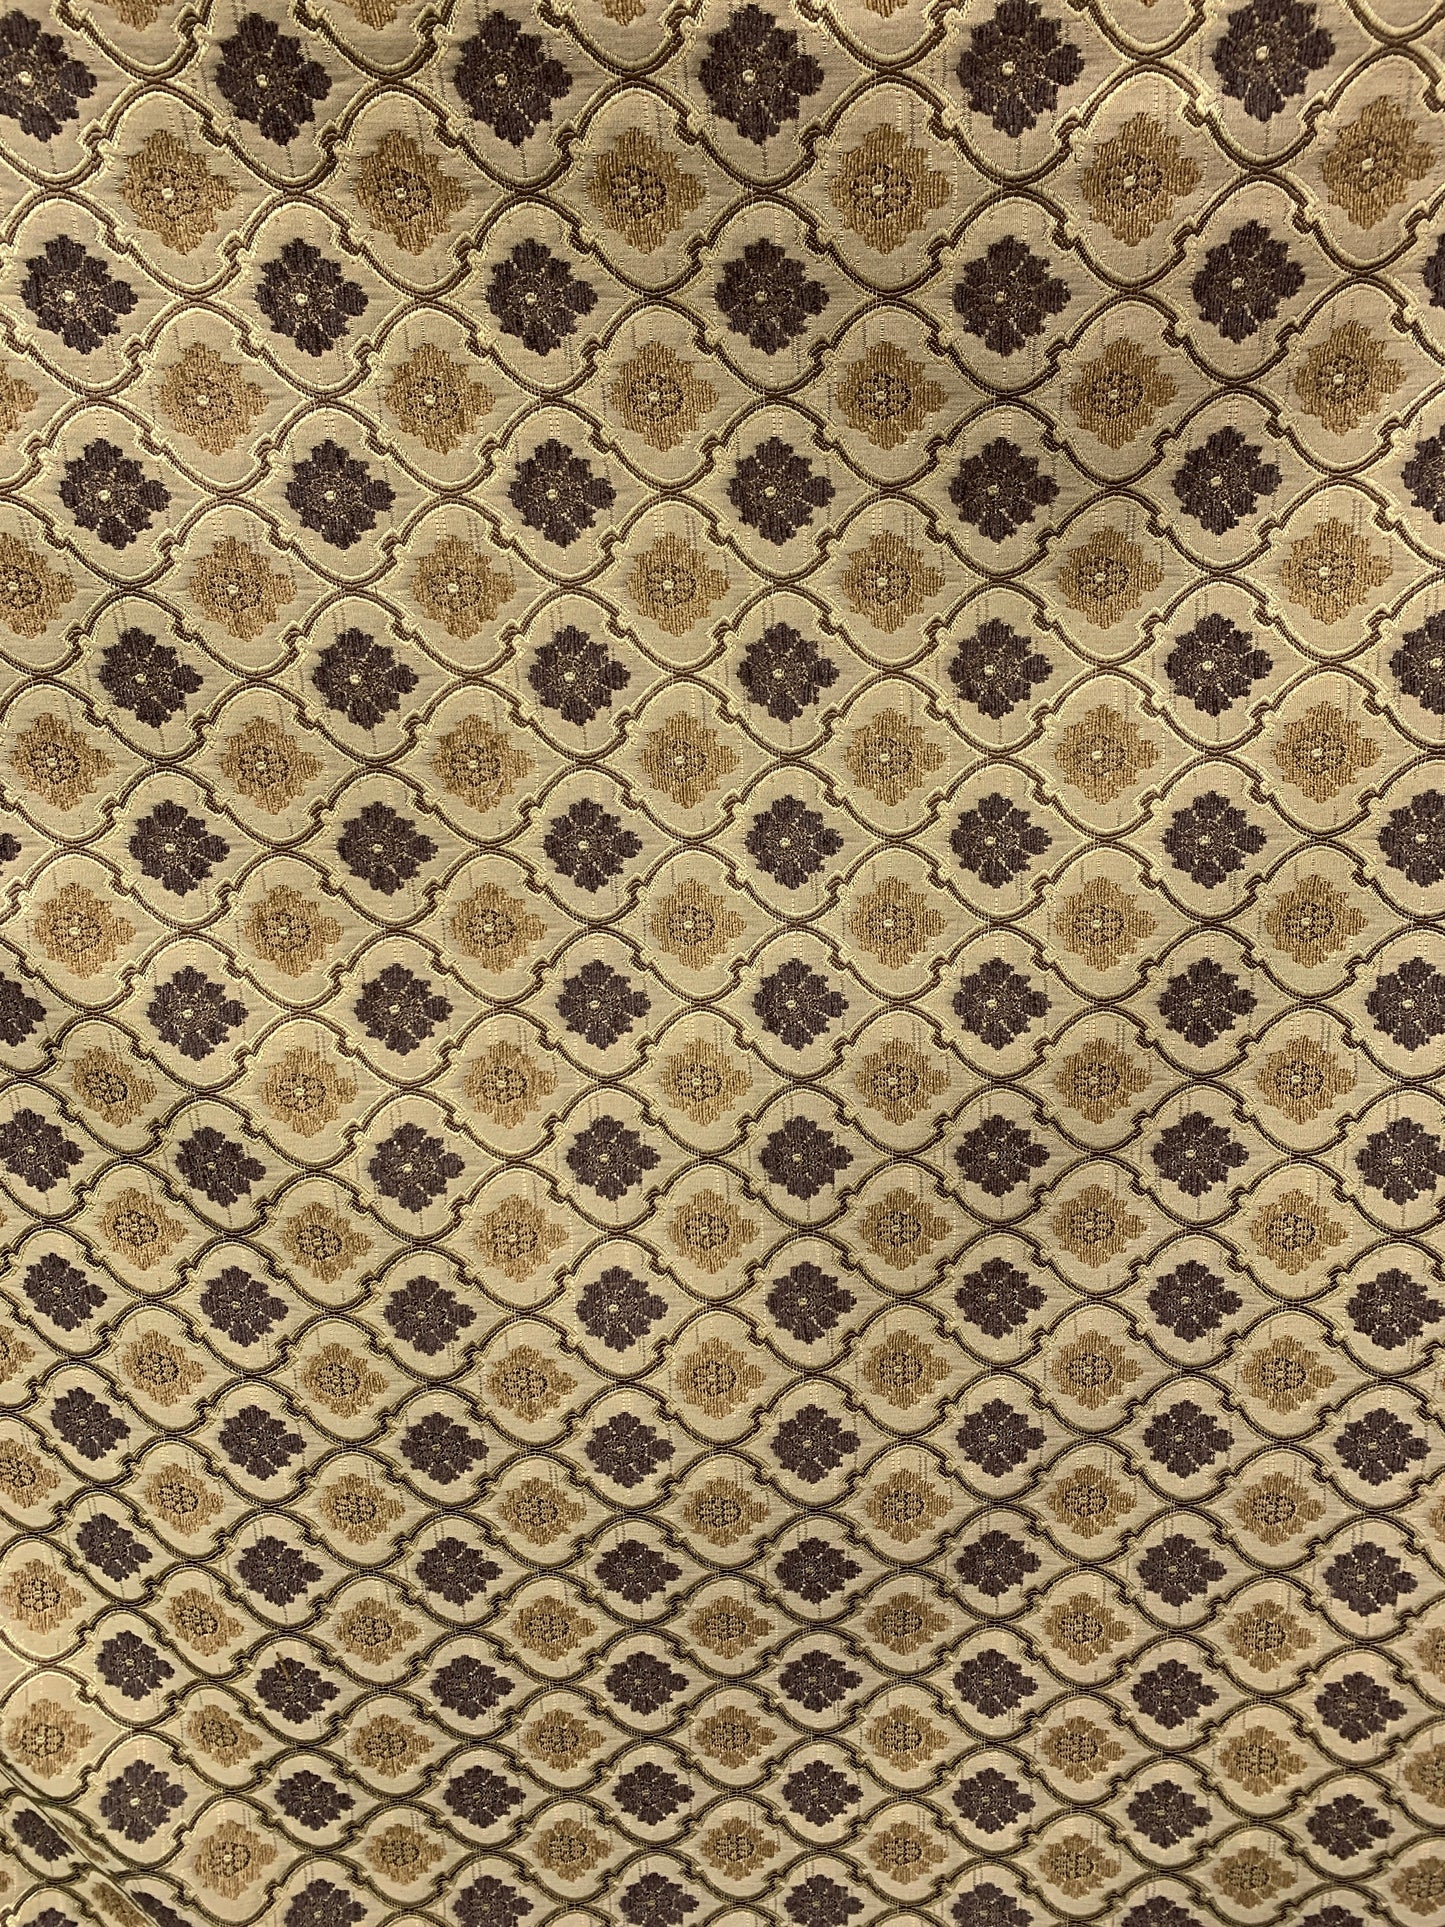 BROWN Floral Trellis Chenille Upholstery Brocade Fabric (56 in.) Sold By The Yard